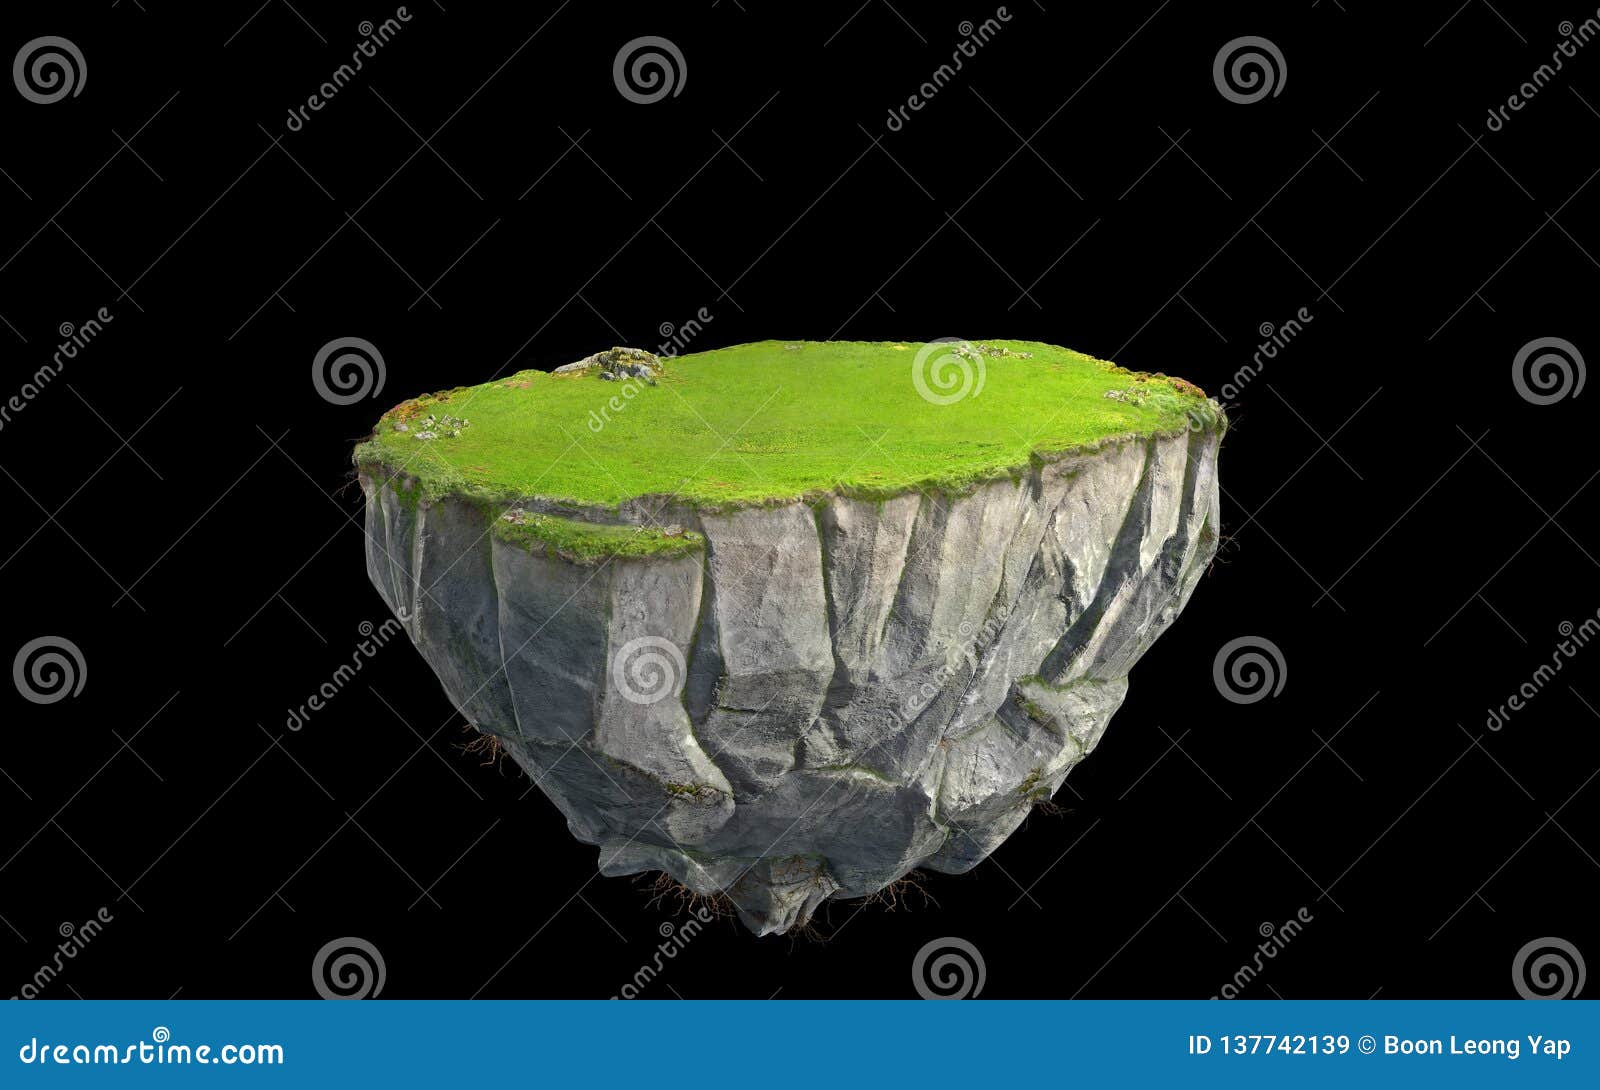 3d fantasy floating island with green grass land  on black